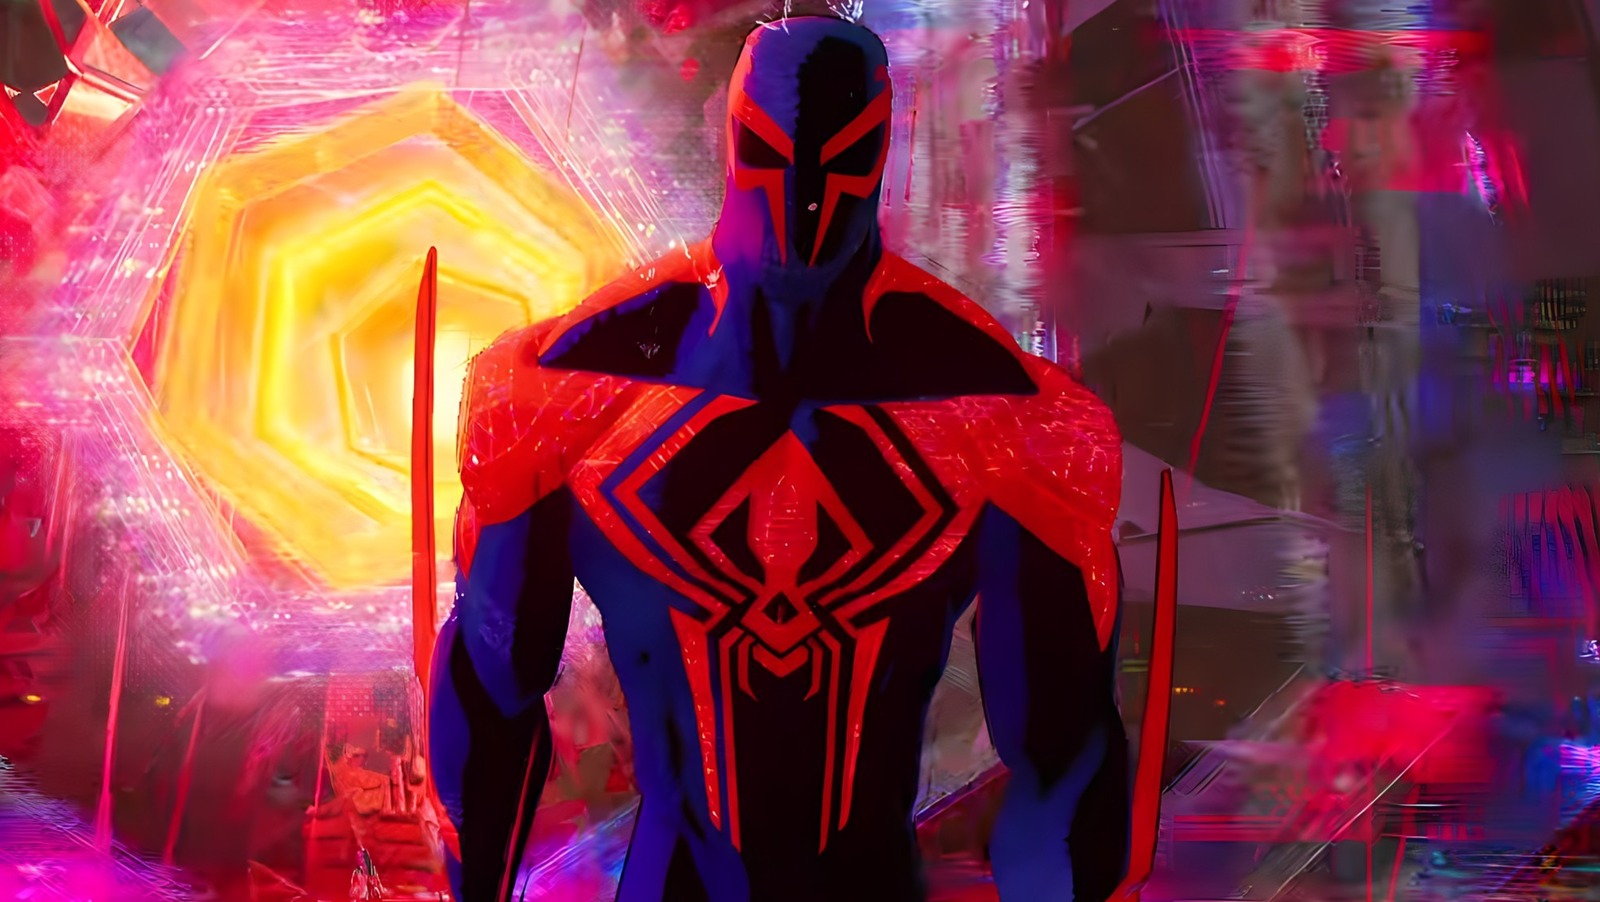 Ready go to ... https://www.looper.com/1302995/spider-man-across-the-spider-verse-massive-implications-second-loki-season/ [ Spider-Man: Across The Spider-Verse Has Massive Implications For Loki Season 2 - Looper]